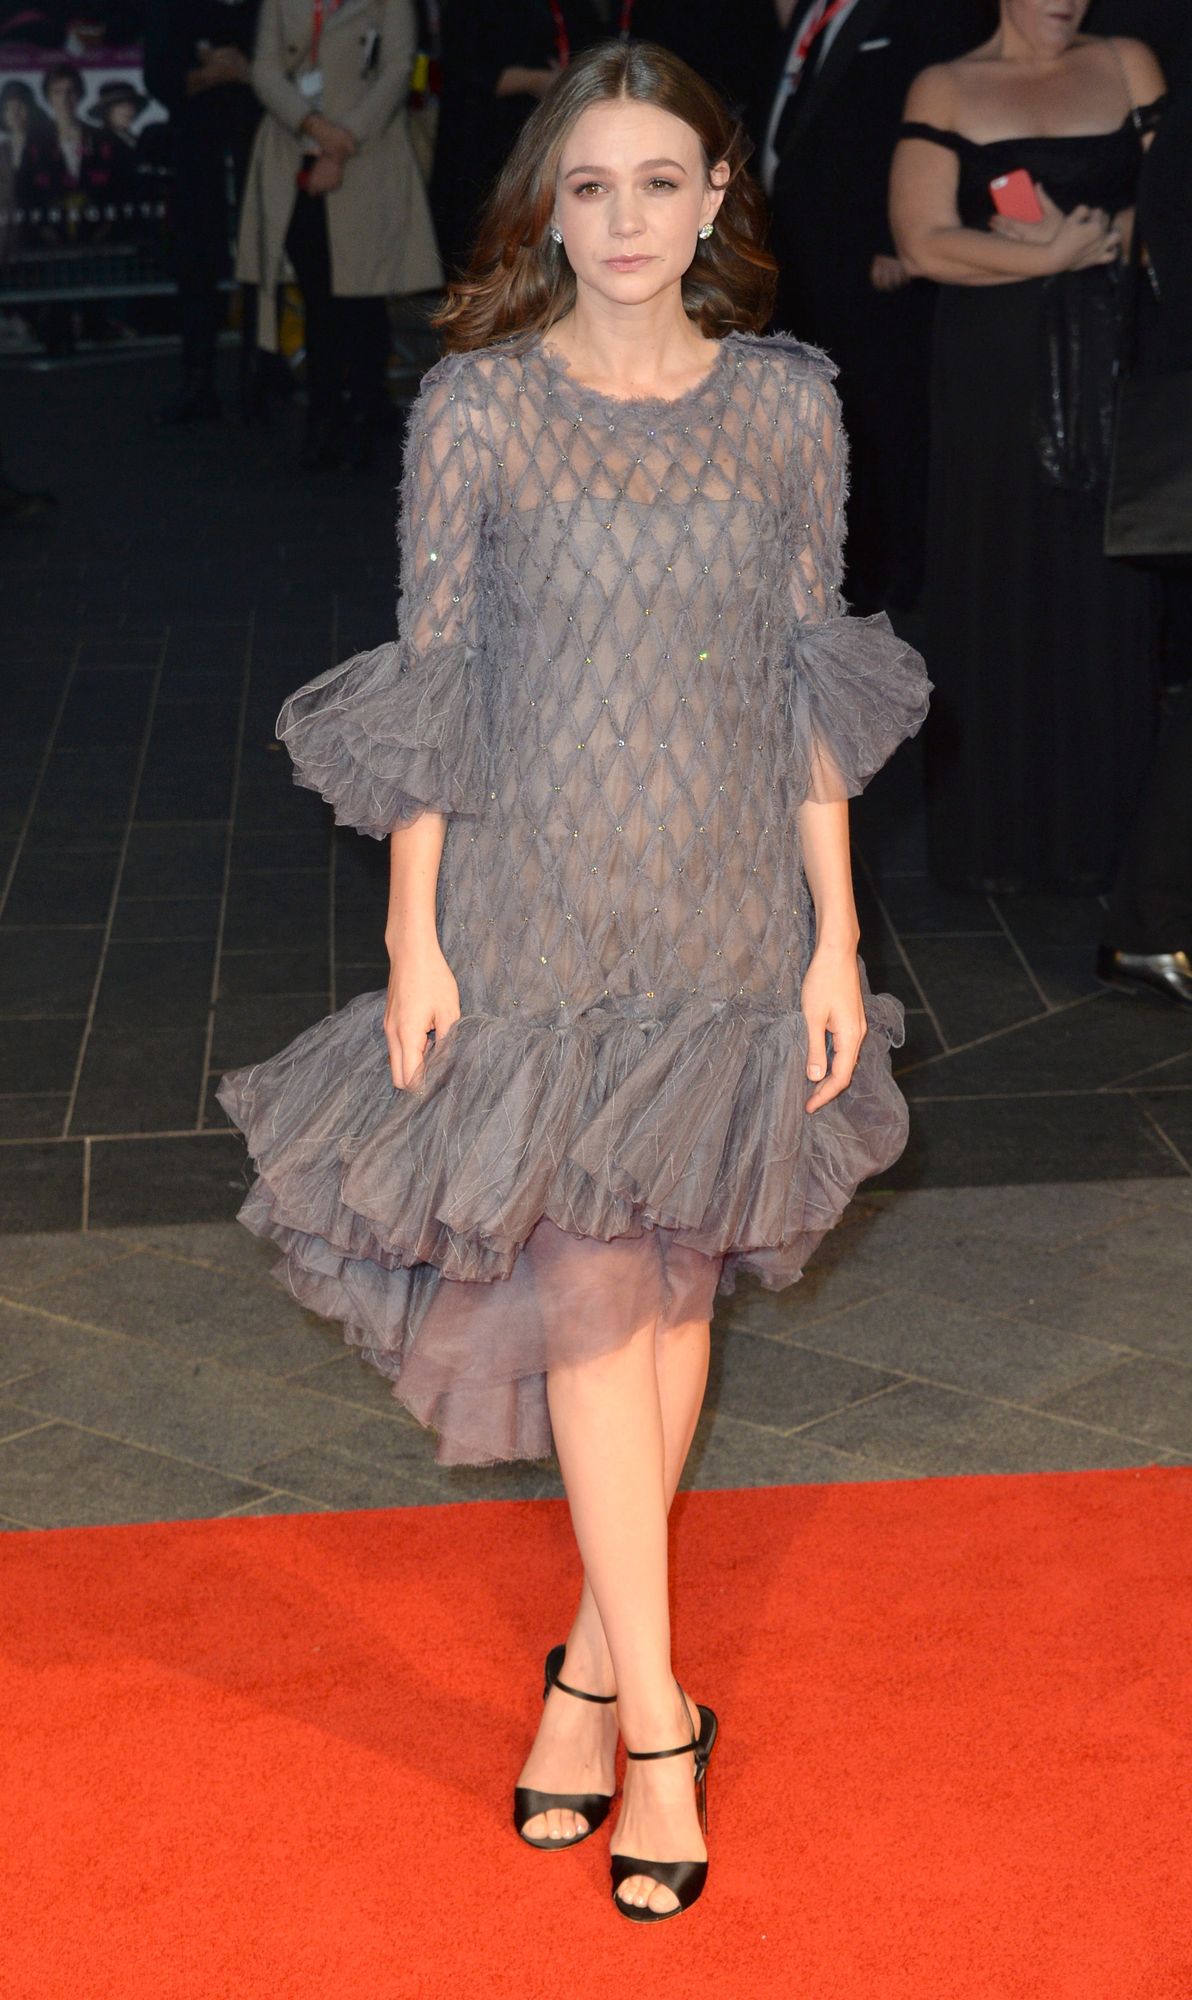 carey-mulligan-in-chanel-couture-suffragette-london-film-festival-opening-night-gala-premiere